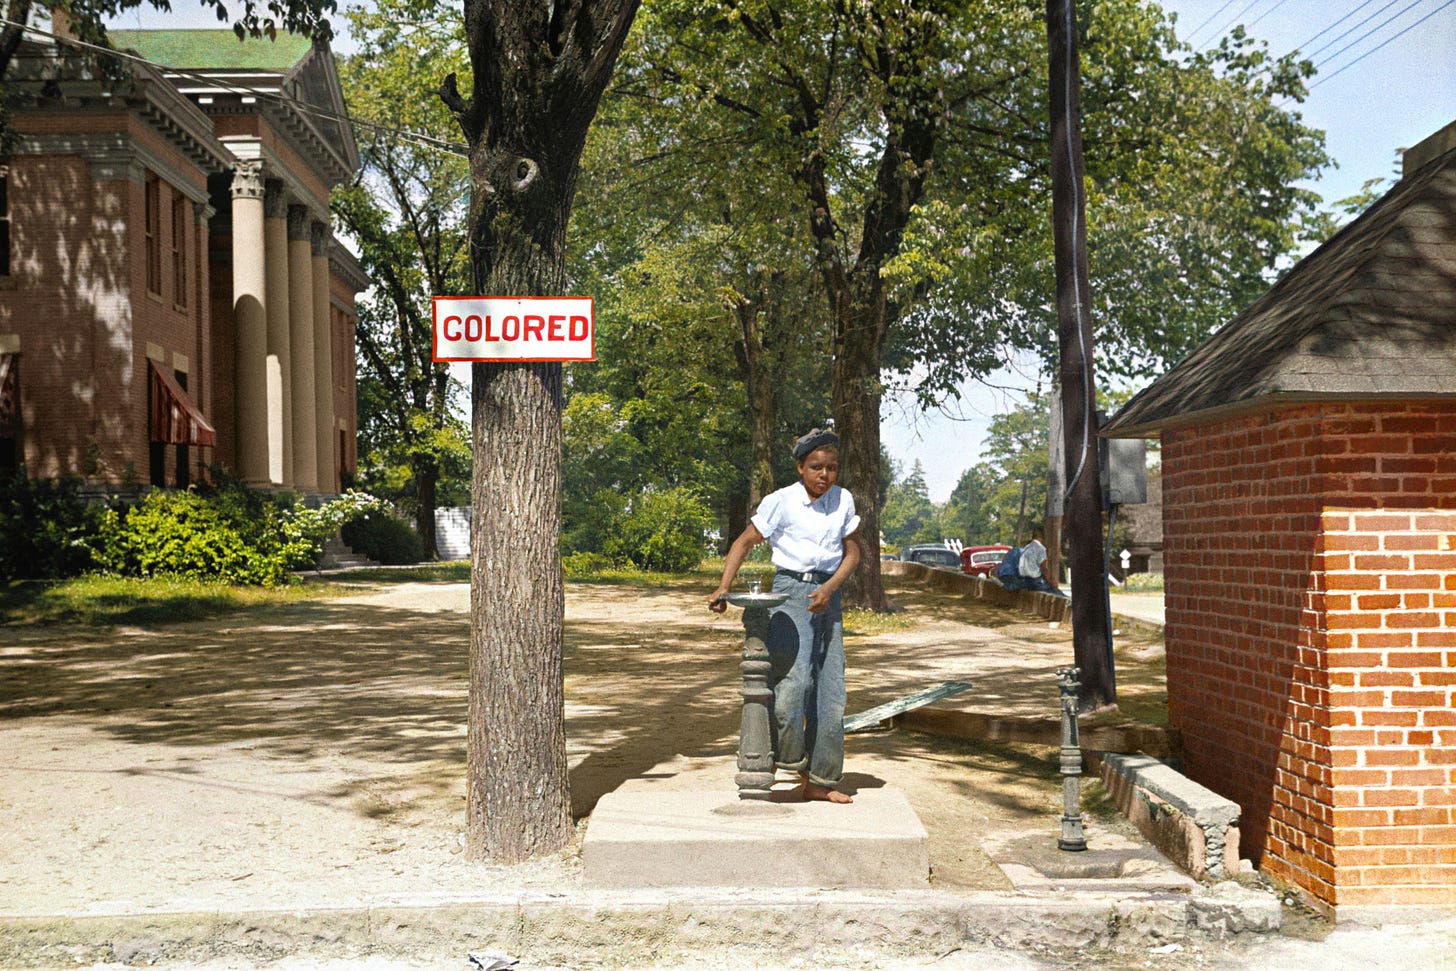 A black boy at a segregated drinking fountain with a sign that reads "colored" nearby